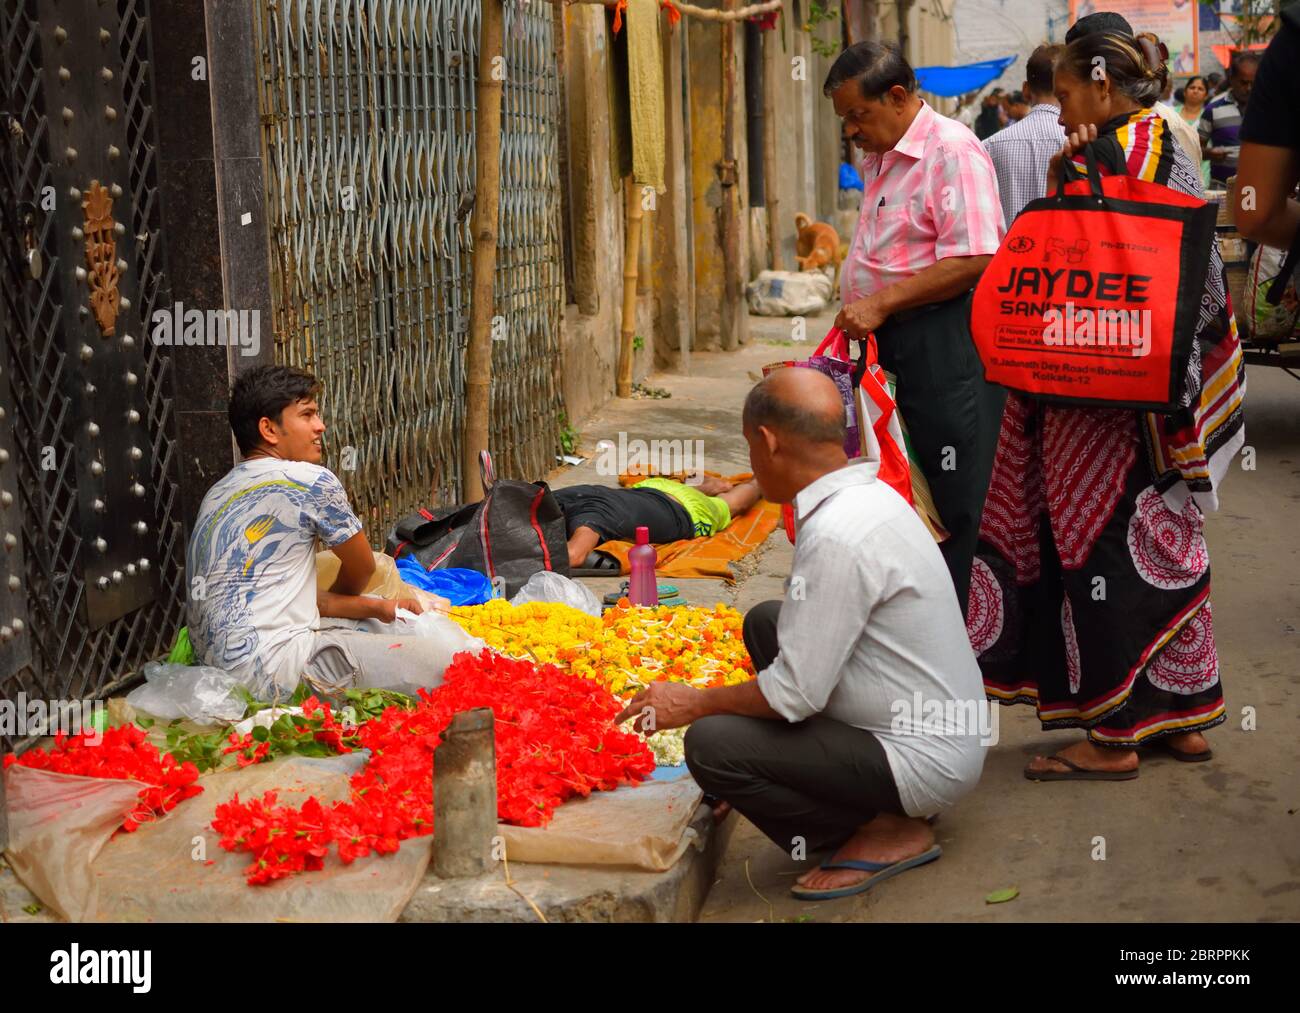 People buying flowers from a street vendor. Stock Photo